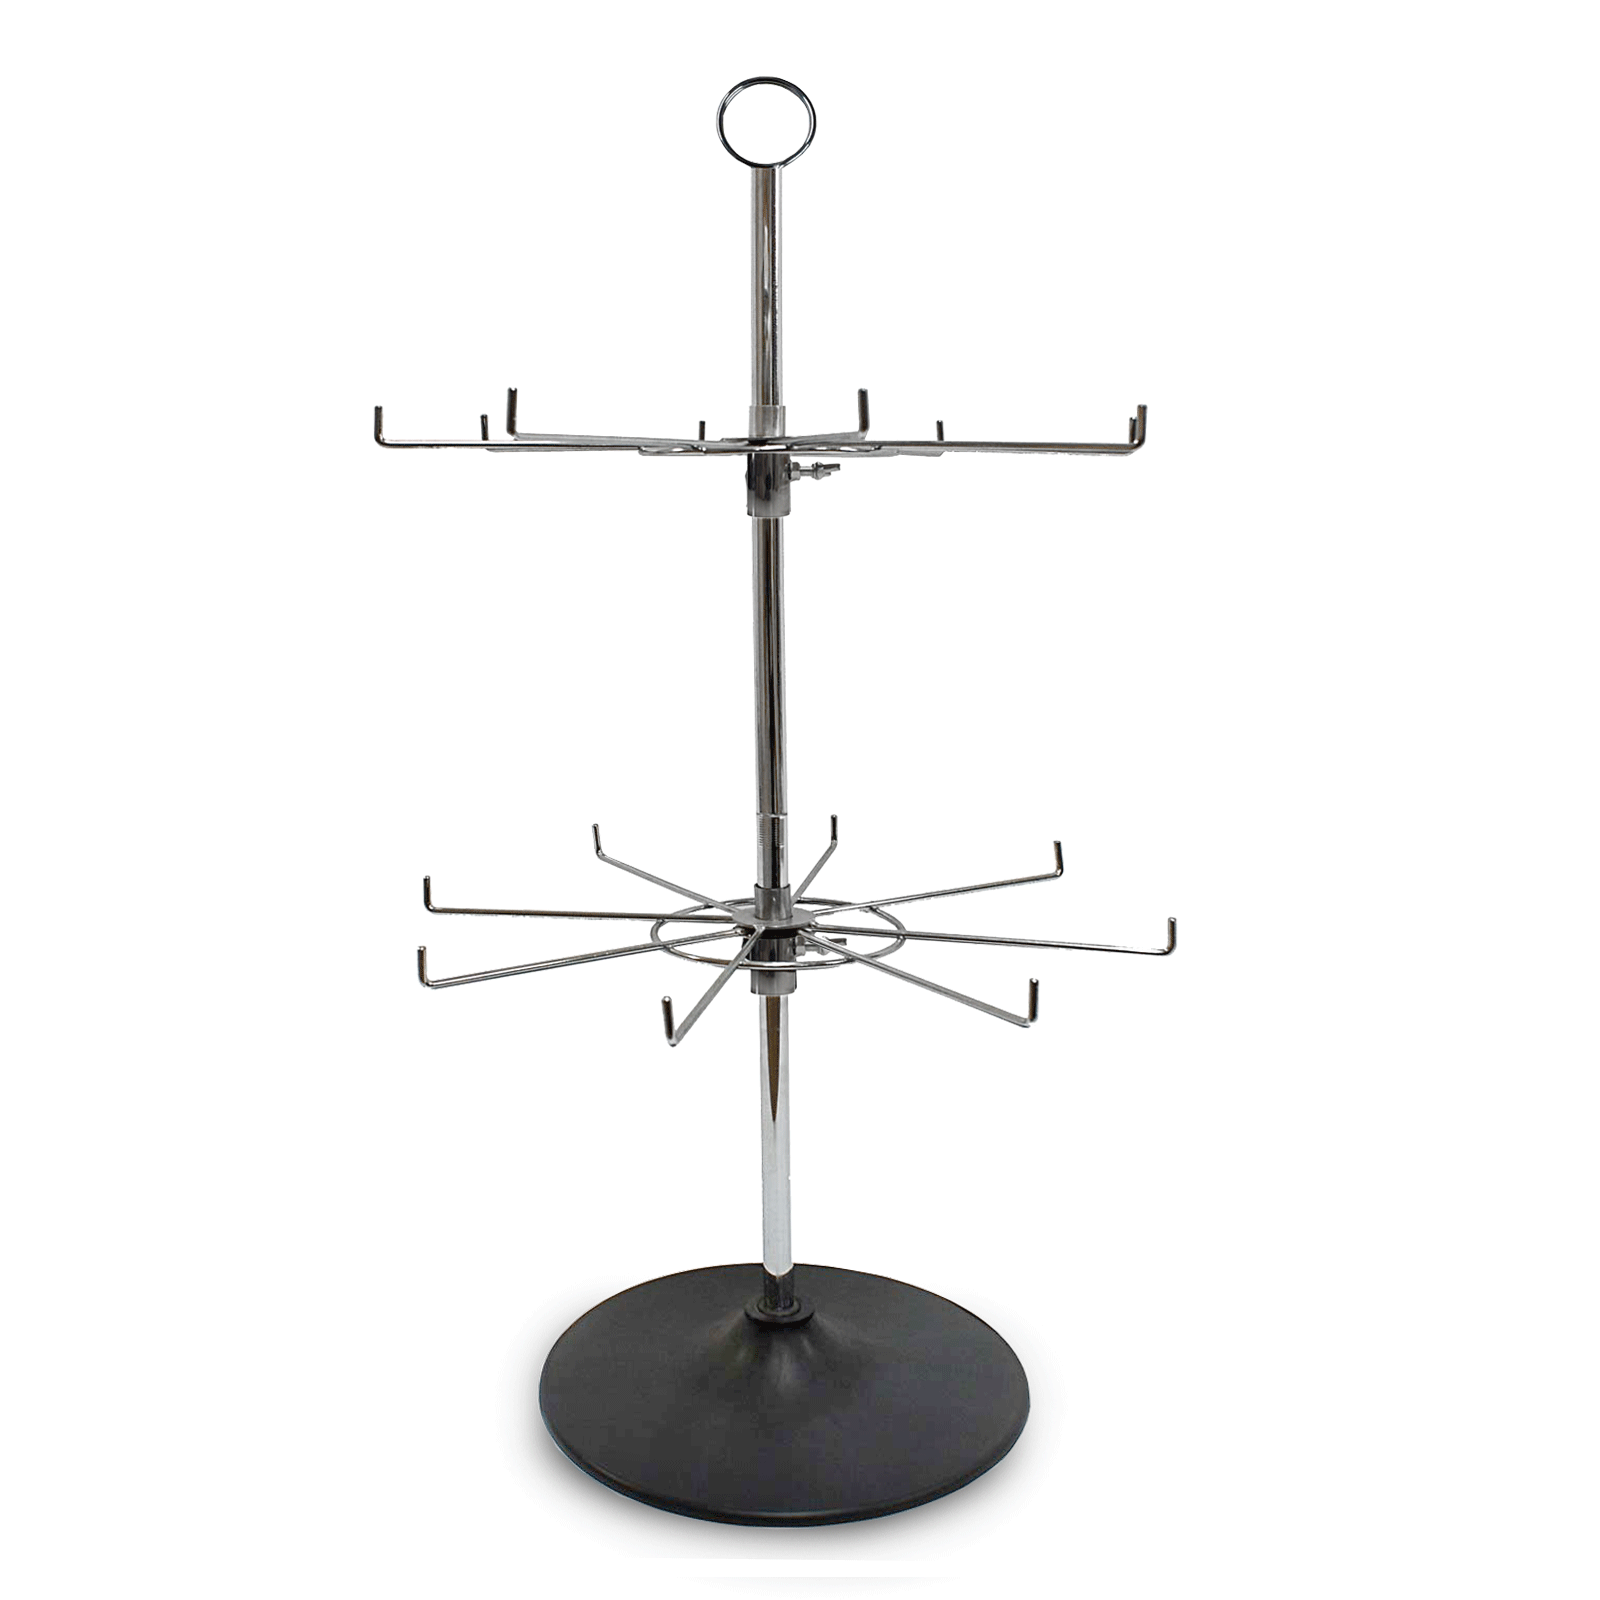 Rotary Hook Counter Stand - 2 Tiers - 16 Hook Shop Display in Chrome (J4)